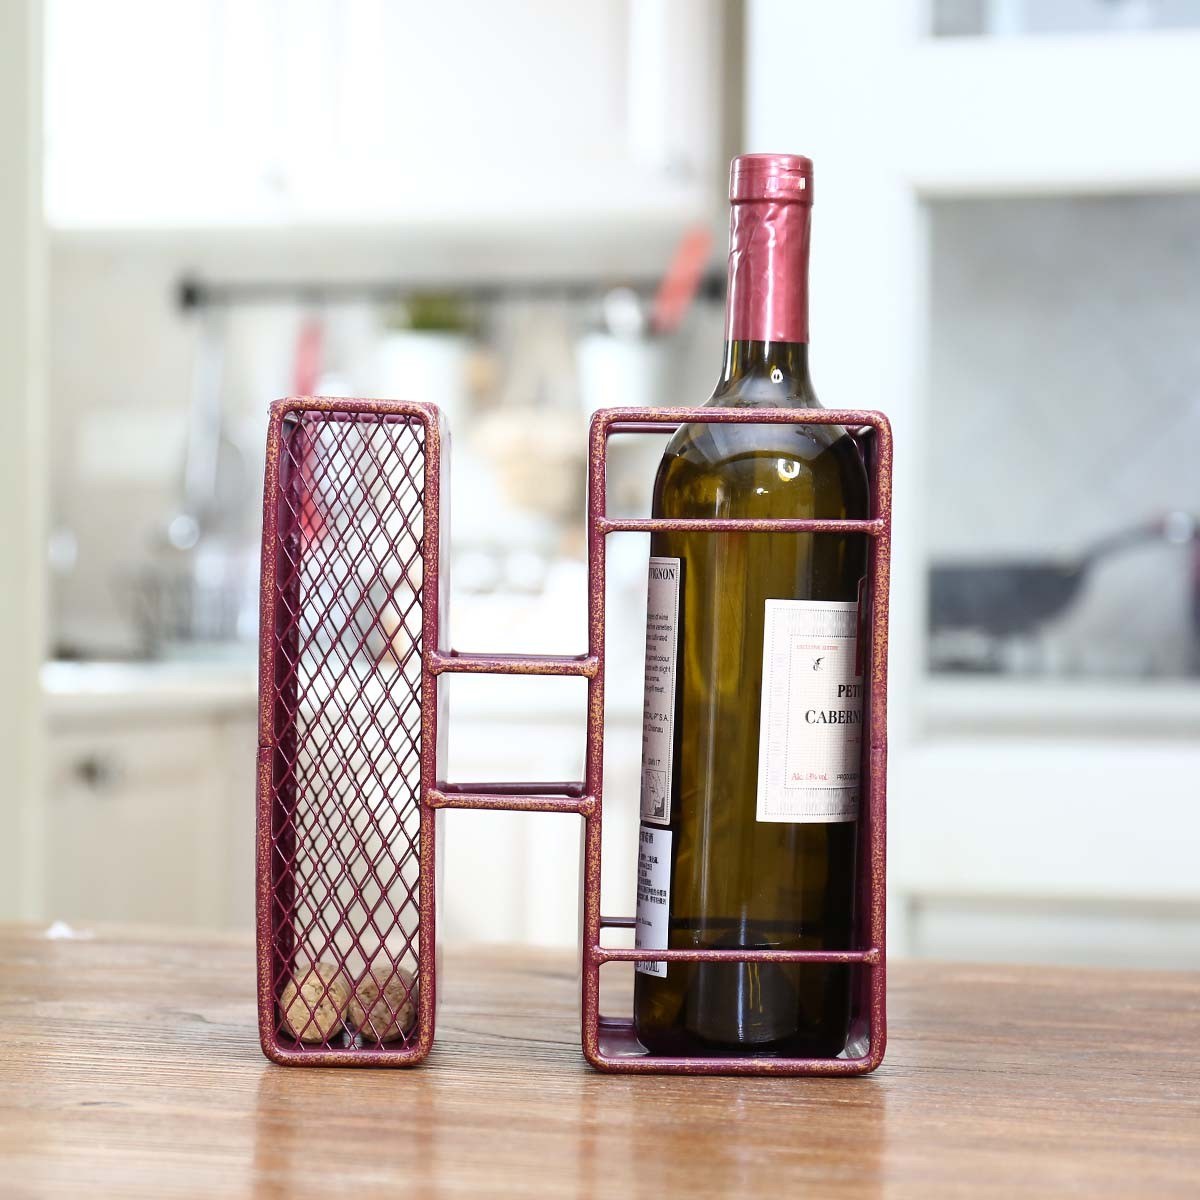 Letter "H" is a beautiful items to your single wine bottle holder